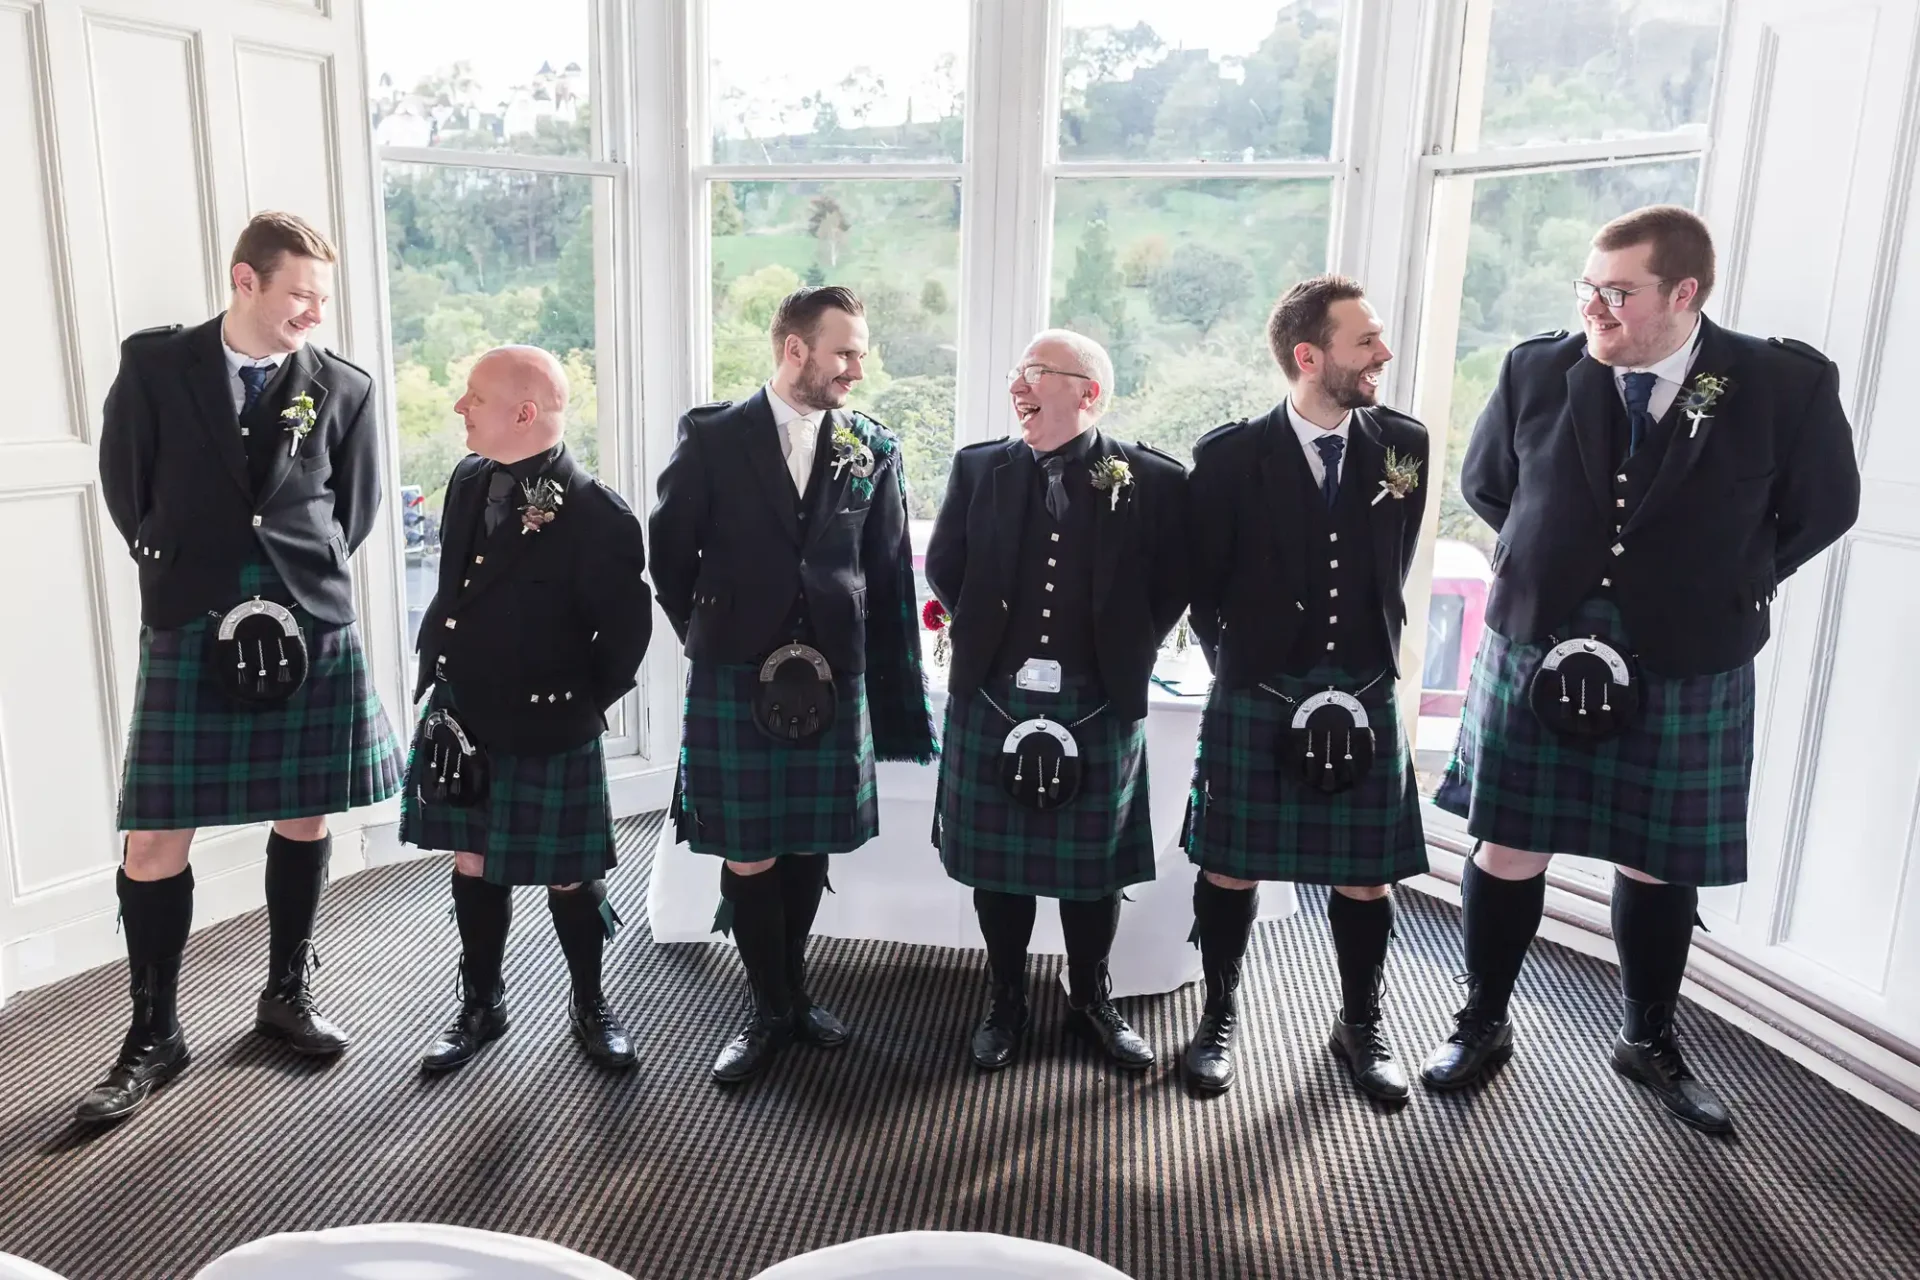 Group of six men in traditional scottish kilts and formal jackets, laughing together by large windows in a bright room.